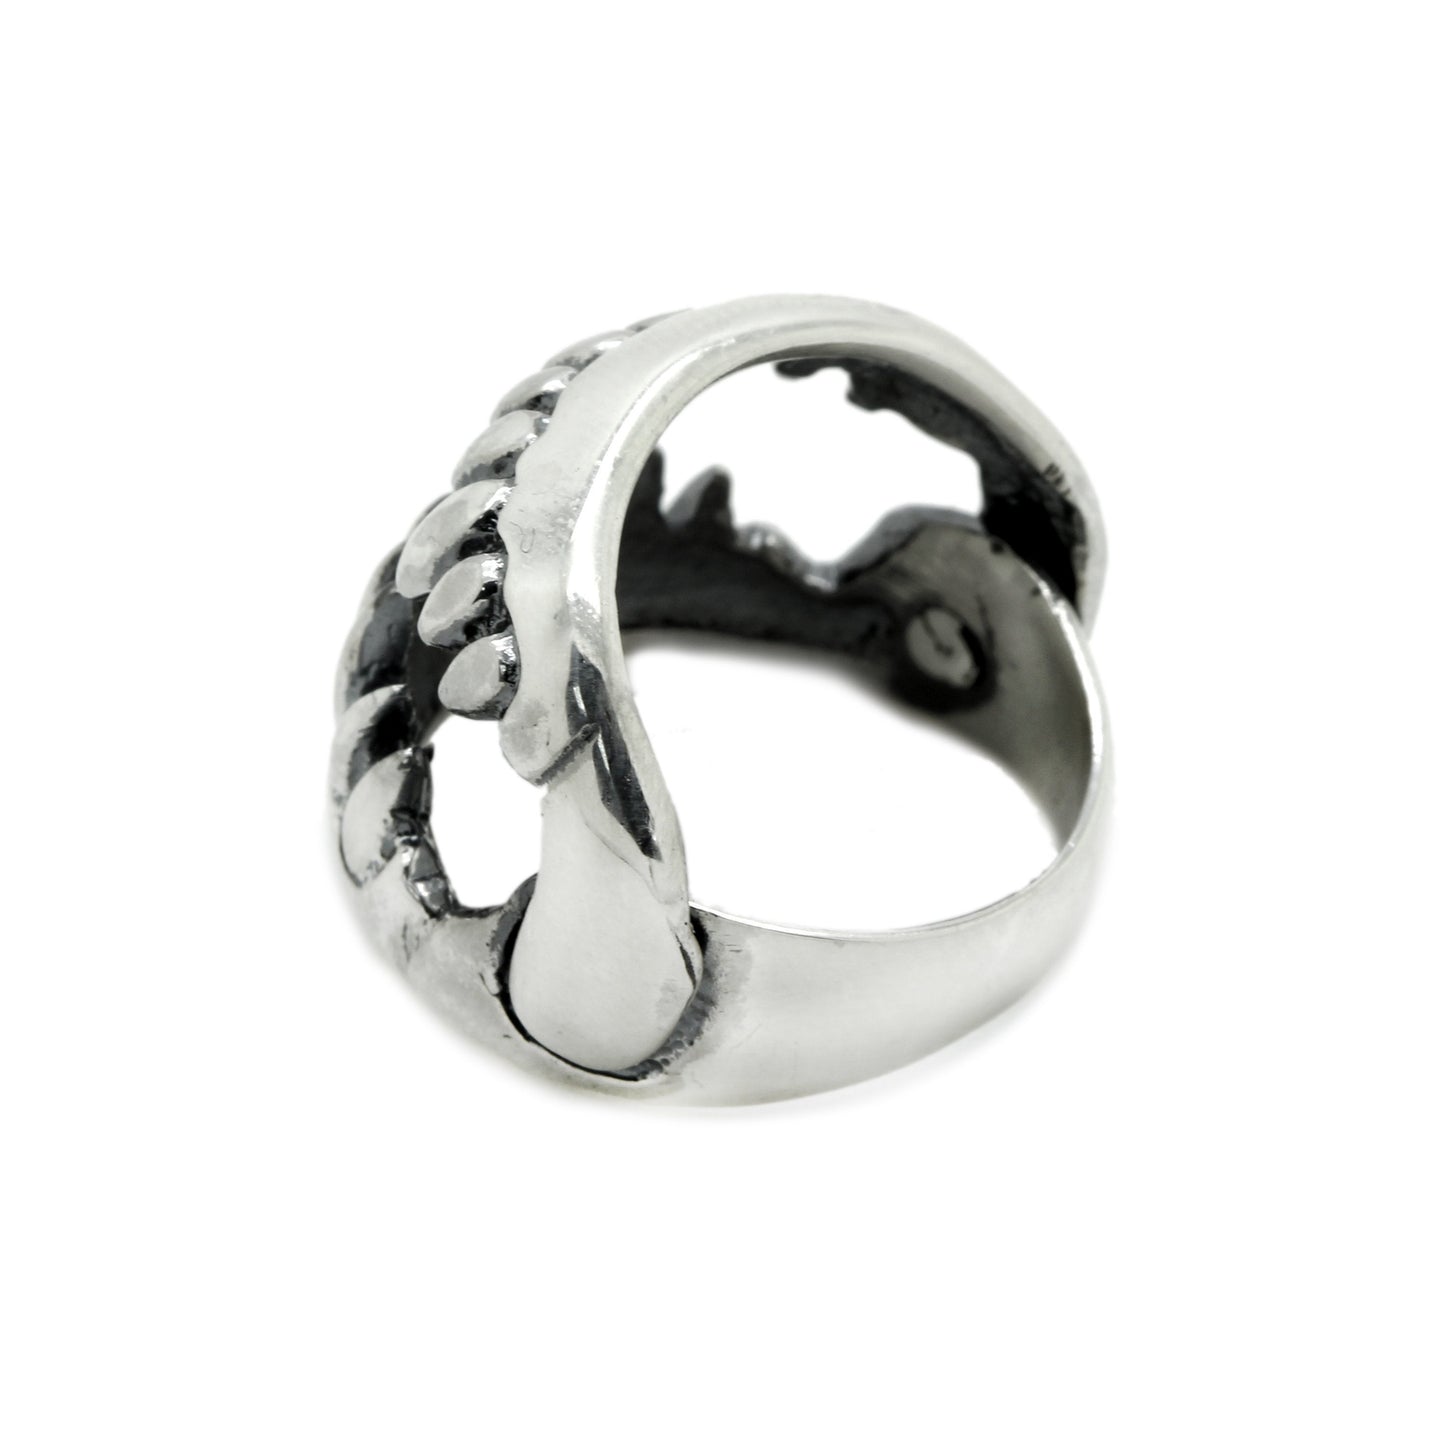 Moving Jaw Unisex Ring Silver 925